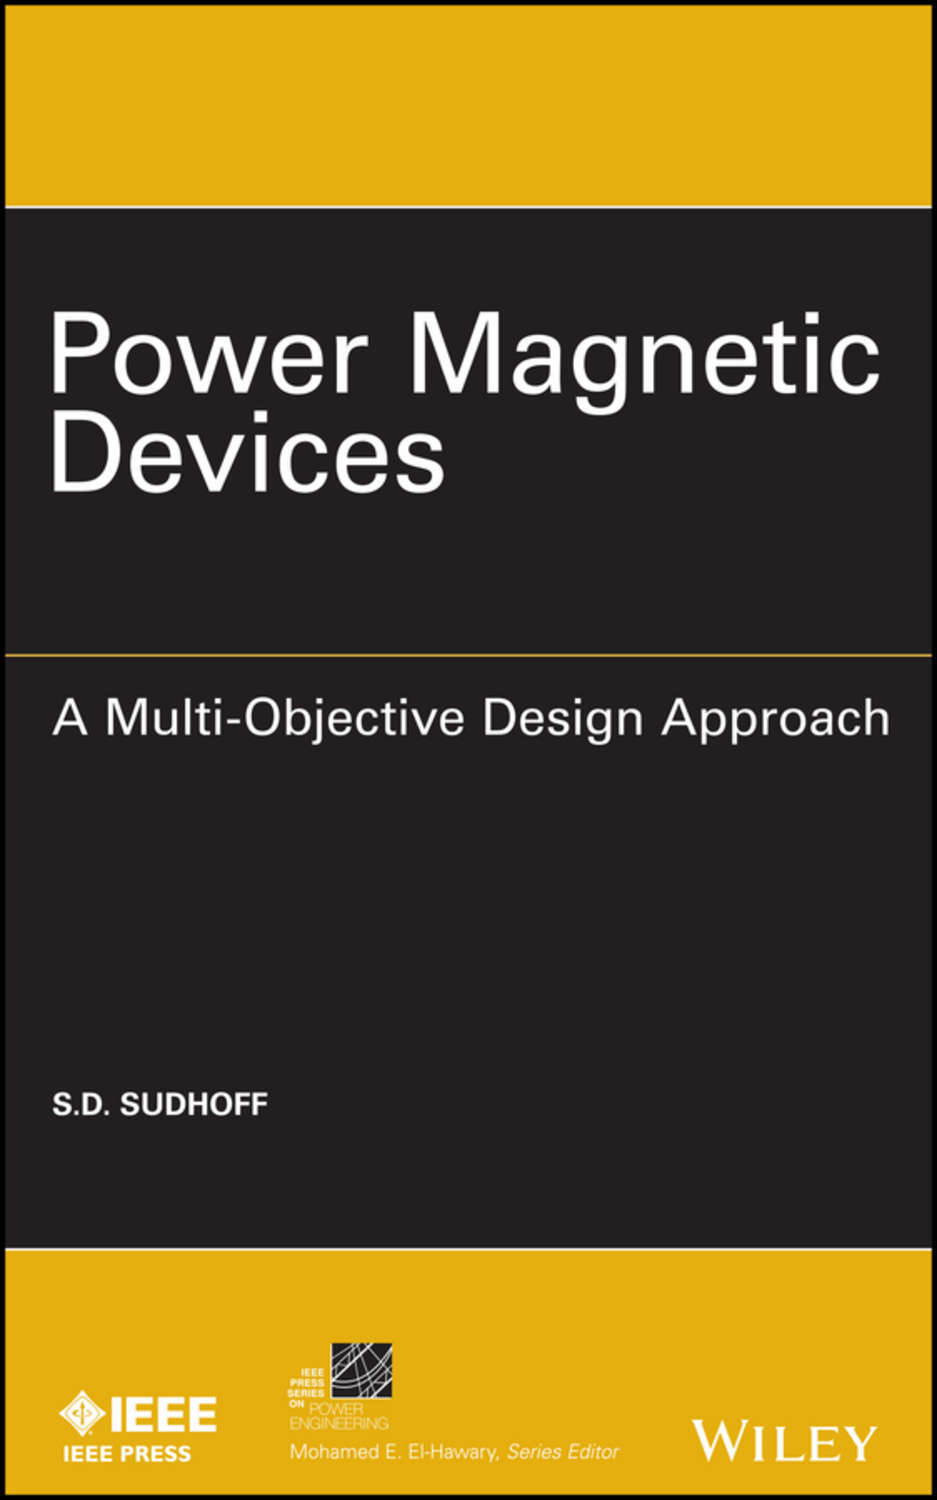 Power Magnetic devices. Multi objective. Пауэр книги